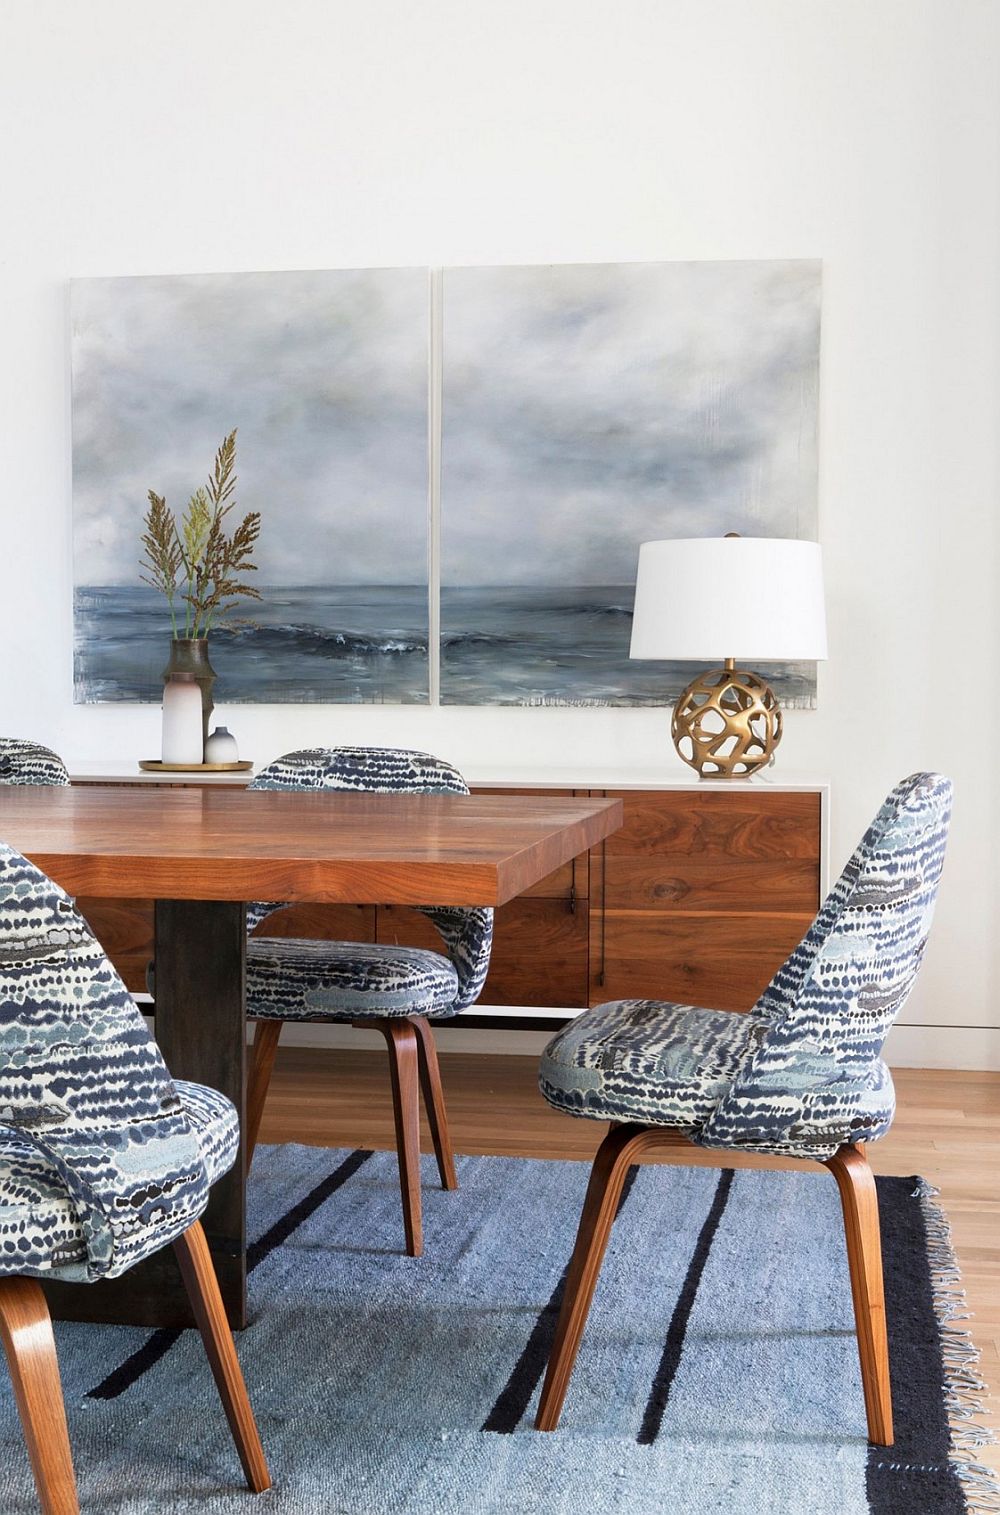 Wall art ushers in an image of tranquility inside the dining room